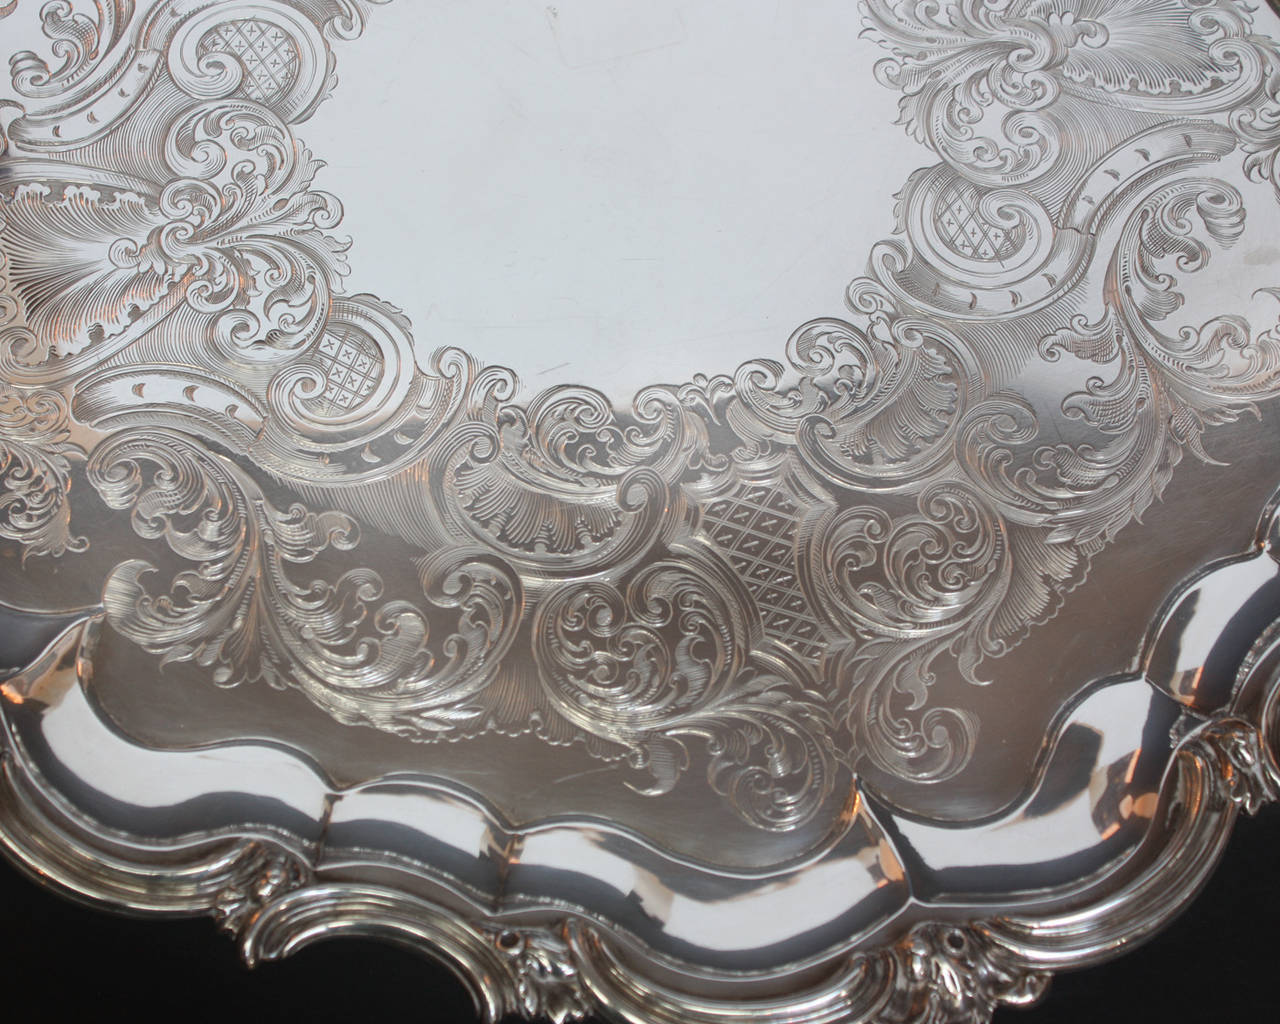 A large round sterling silver tray, Chippendale style, with elaborate scalloped border interspersed with decorative scrolls and leaves, hand engraved with blank center cartouche, resting on raised acanthus leaf and scrolled feet, mark of Jos.and